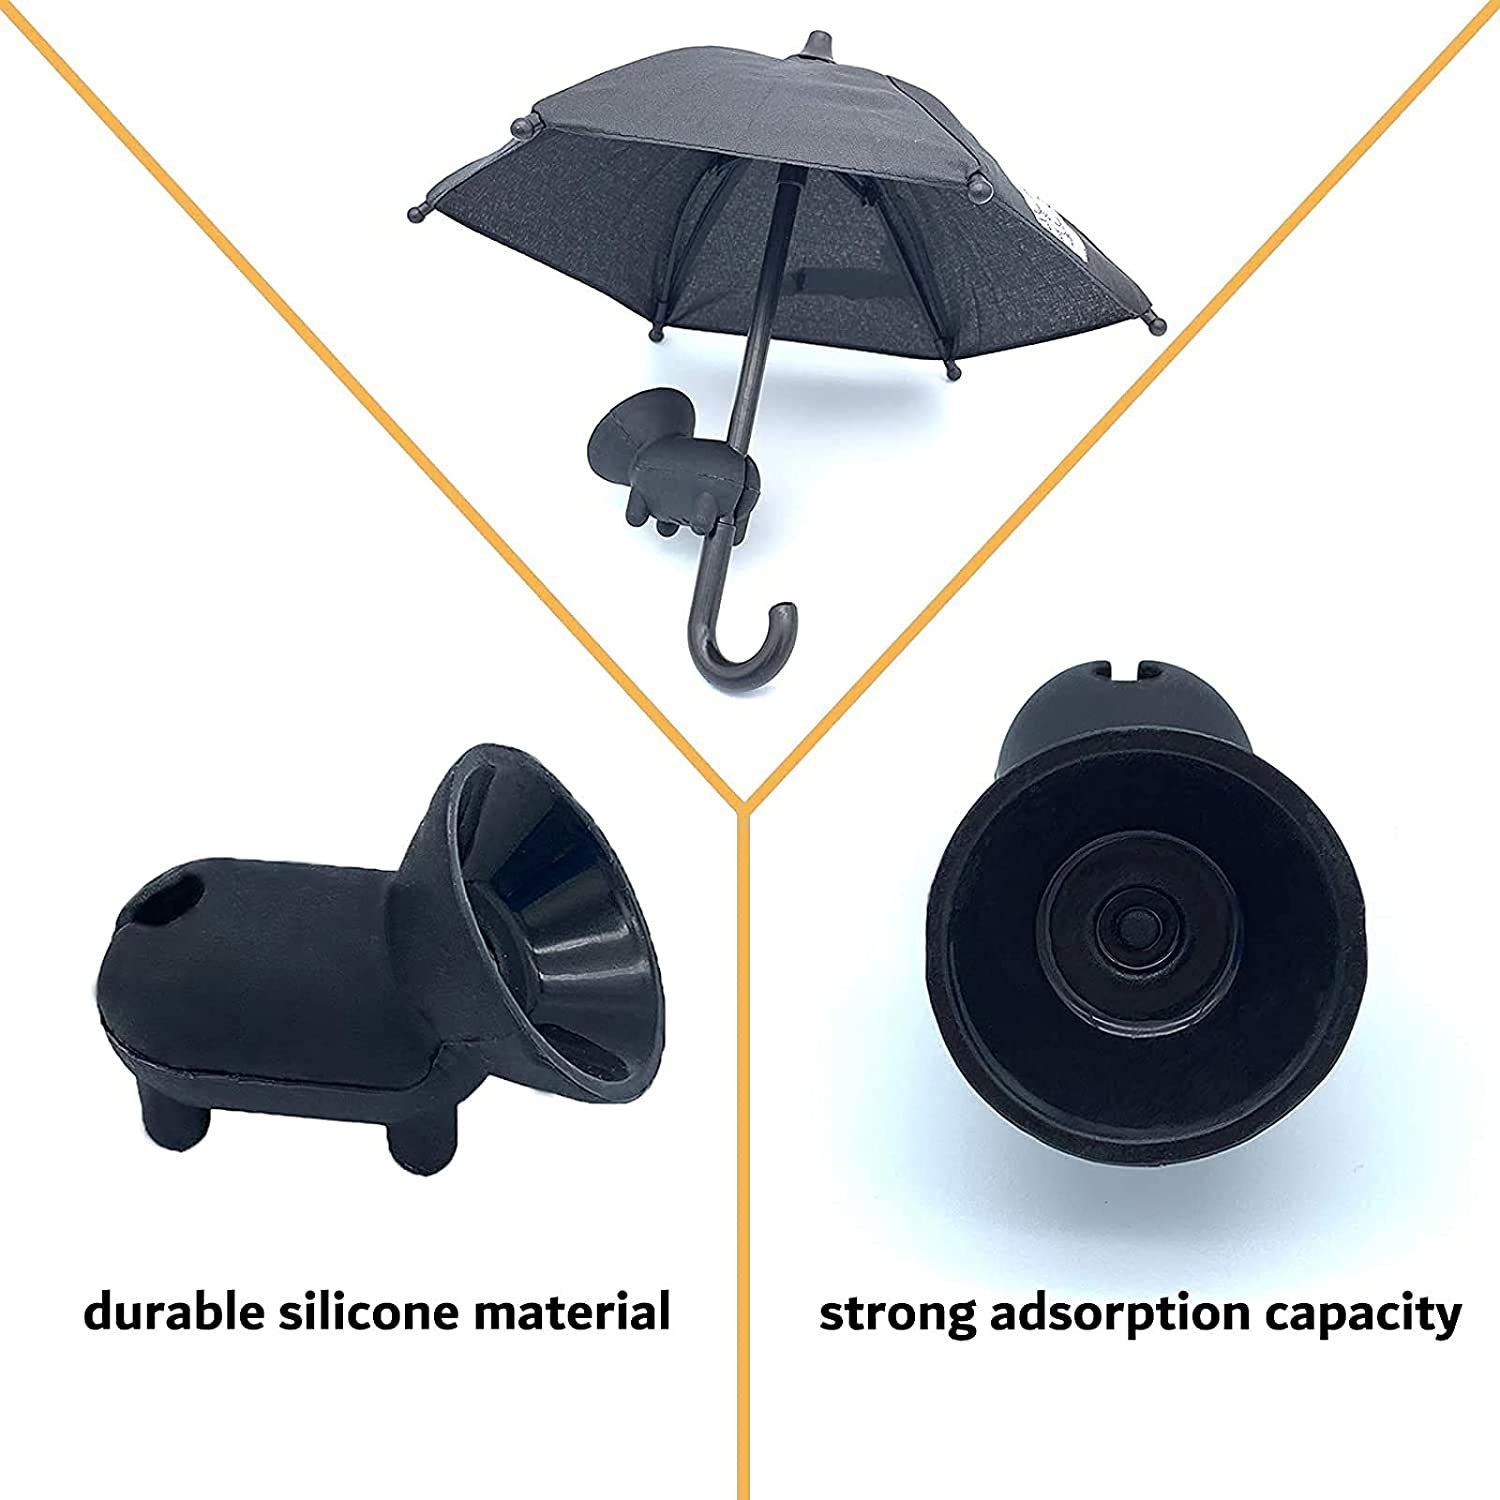 🔥Last Day Promotion-SAVE 50% OFF🔥Phone Umbrella Suction Cup Stand,Sun Shade Cover-BUY 2 GET 15% OFF